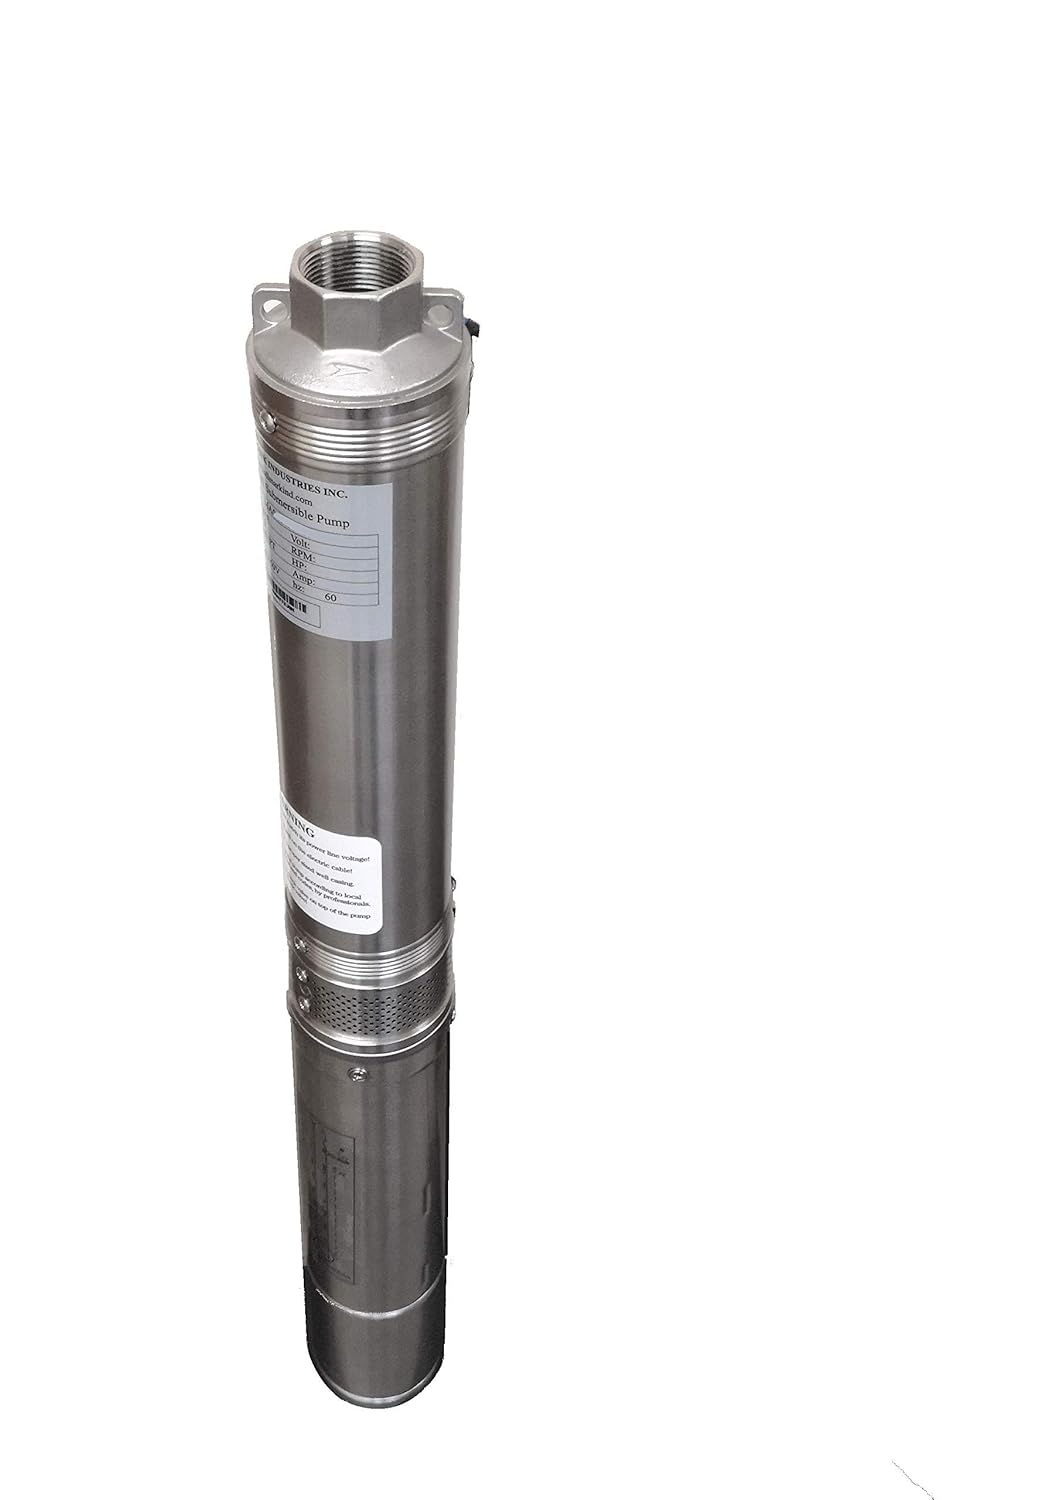 Hallmark Industries MA0343X-4A Deep Well Submersible Pump, 1/2 hp, 230V, 60 Hz, 25 GPM, 150 Head, Stainless Steel, 4